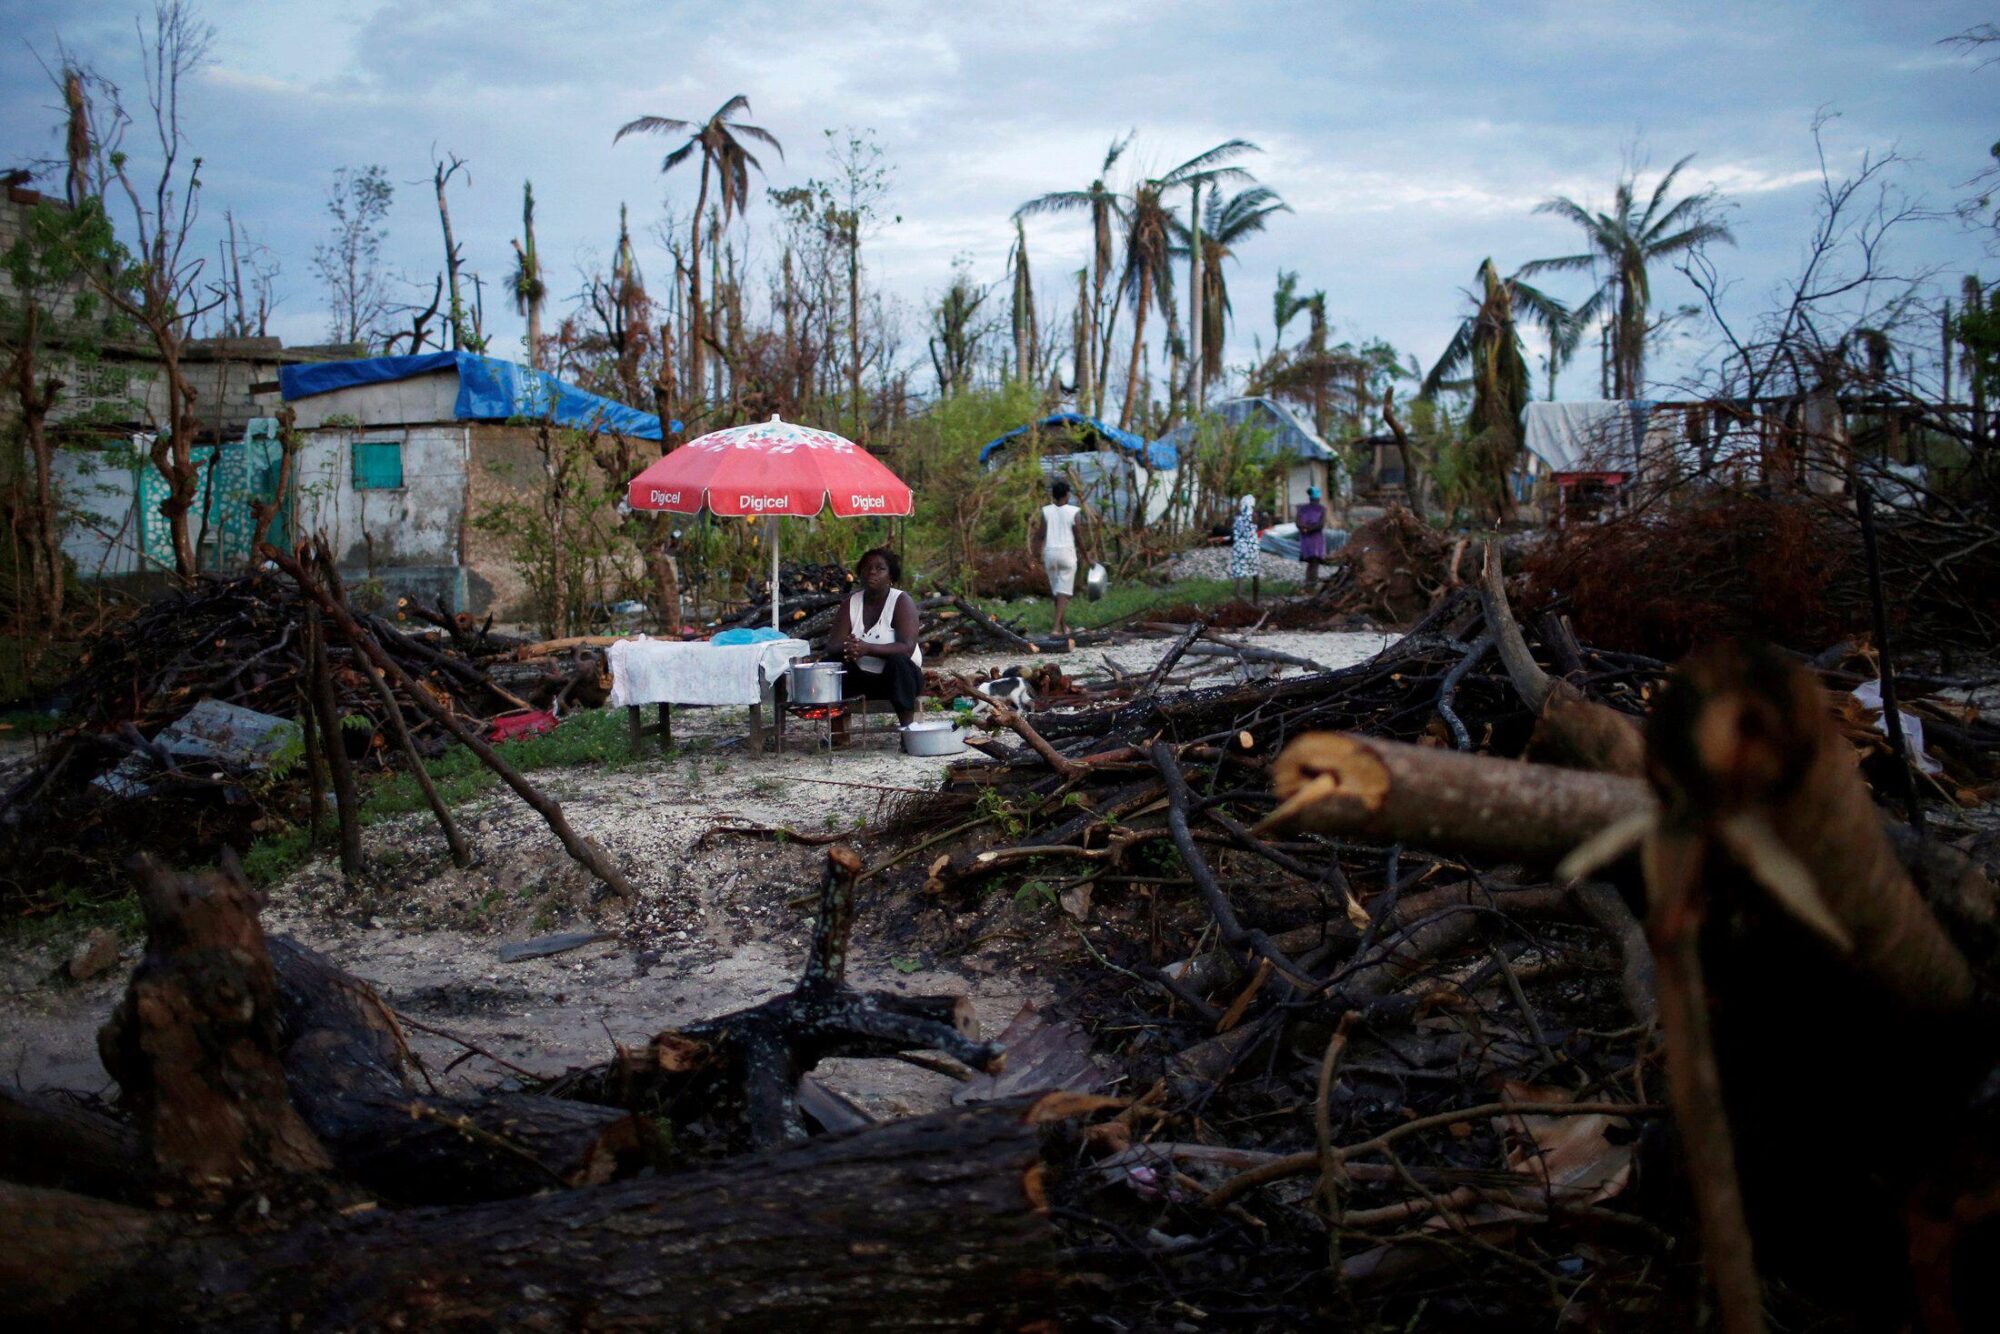 <p>A food vendor works amid the damage left behind after Hurricane Matthew in Haiti, October 2016. Finance for loss and damage from climate change has been the most contentious issue at the COP27 summit (Image: Carlos Garcia Rawlins / Alamy)</p>